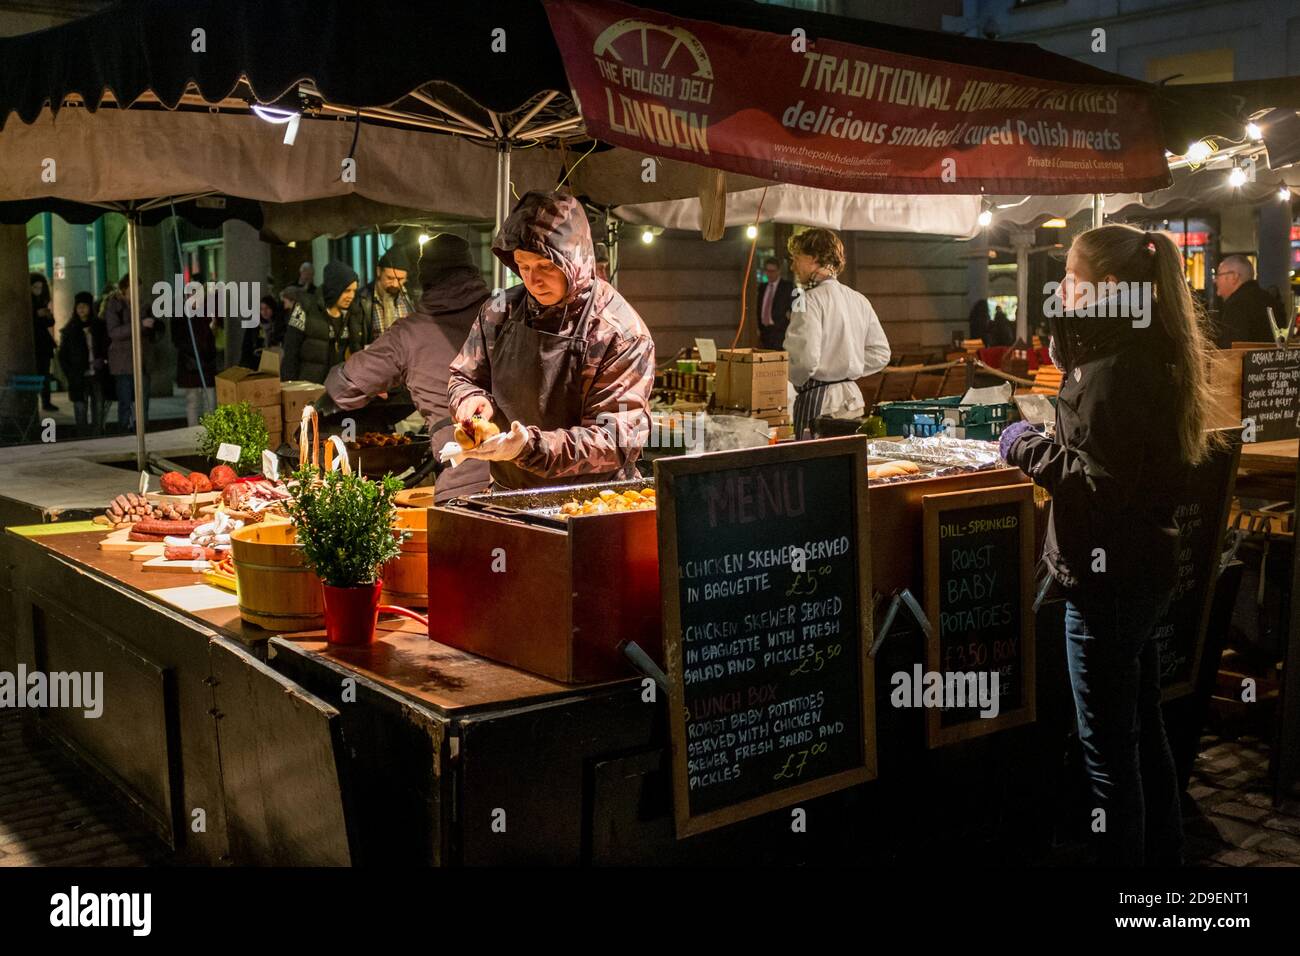 Staff on a traditional Polish food stall serving customers in Covent Garden just after dusk.. 05 February 2015. Photo: Neil Turner Stock Photo